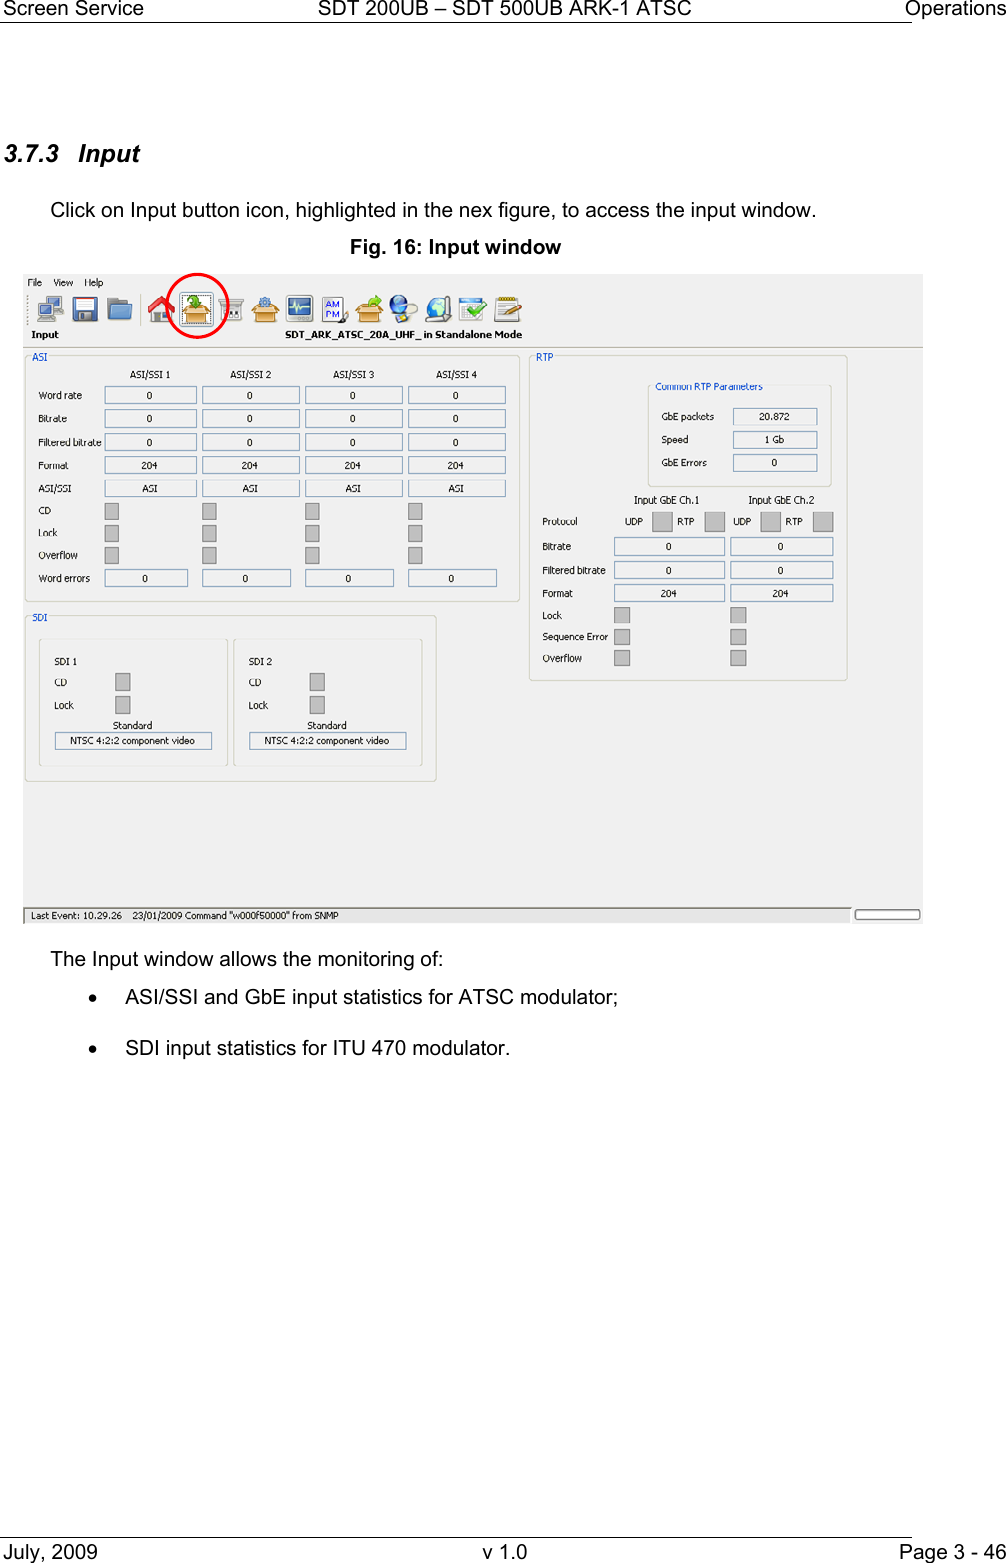 Screen Service  SDT 200UB – SDT 500UB ARK-1 ATSC  Operations July, 2009  v 1.0  Page 3 - 46  3.7.3 Input  Click on Input button icon, highlighted in the nex figure, to access the input window. Fig. 16: Input window  The Input window allows the monitoring of: •  ASI/SSI and GbE input statistics for ATSC modulator; •  SDI input statistics for ITU 470 modulator.  